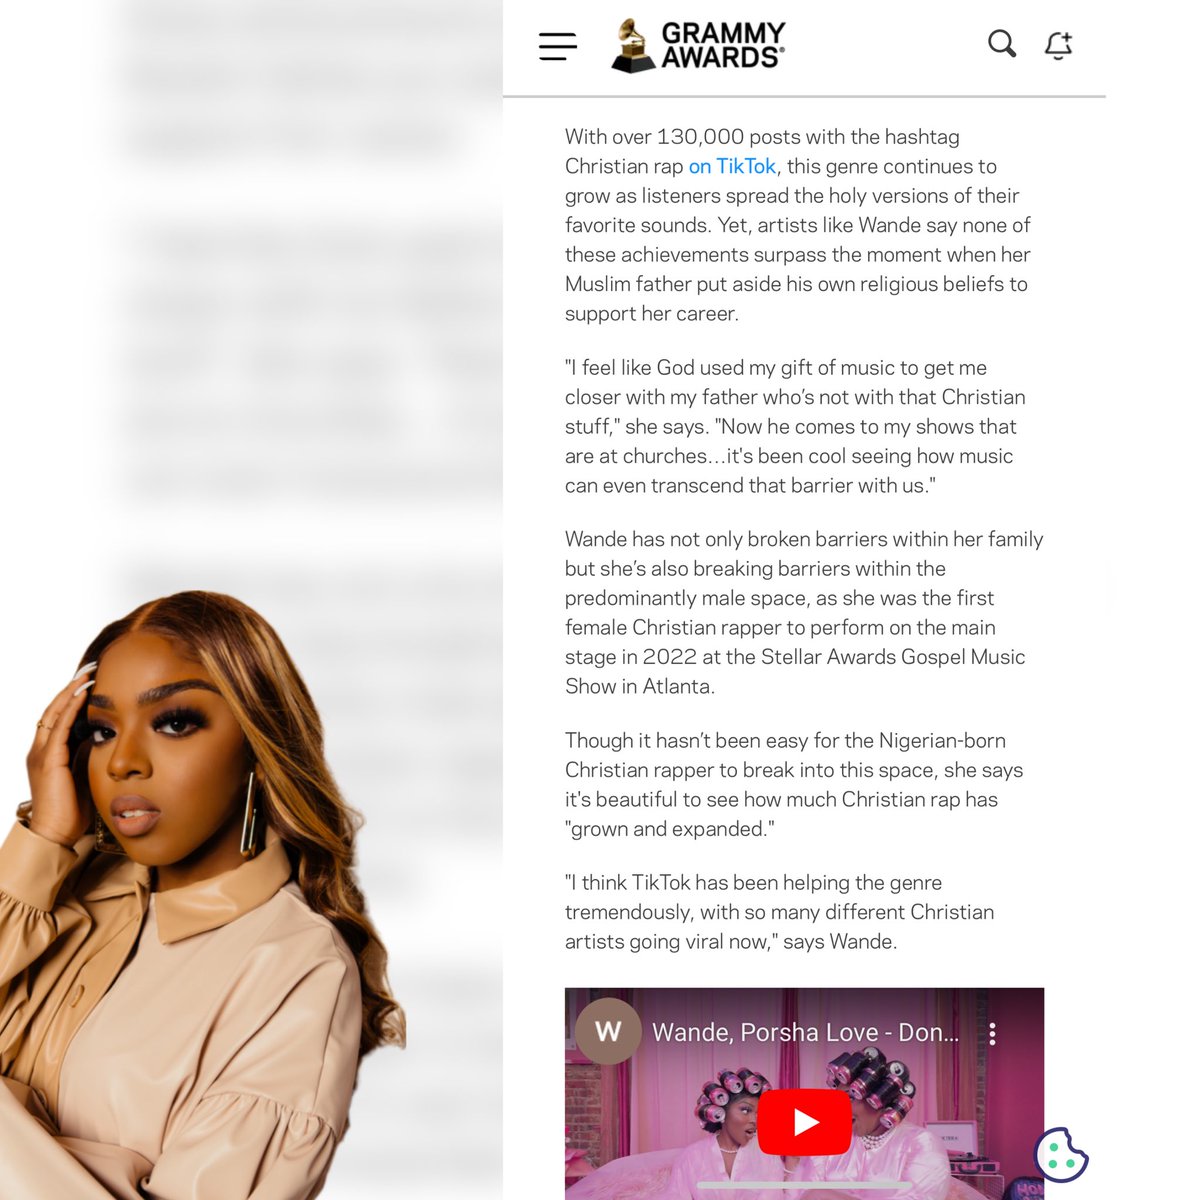 The Grammys wrote an article covering how we share the gospel through rap! Praise the Lord! Read it here! @RecordingAcad ffm.link/grammys